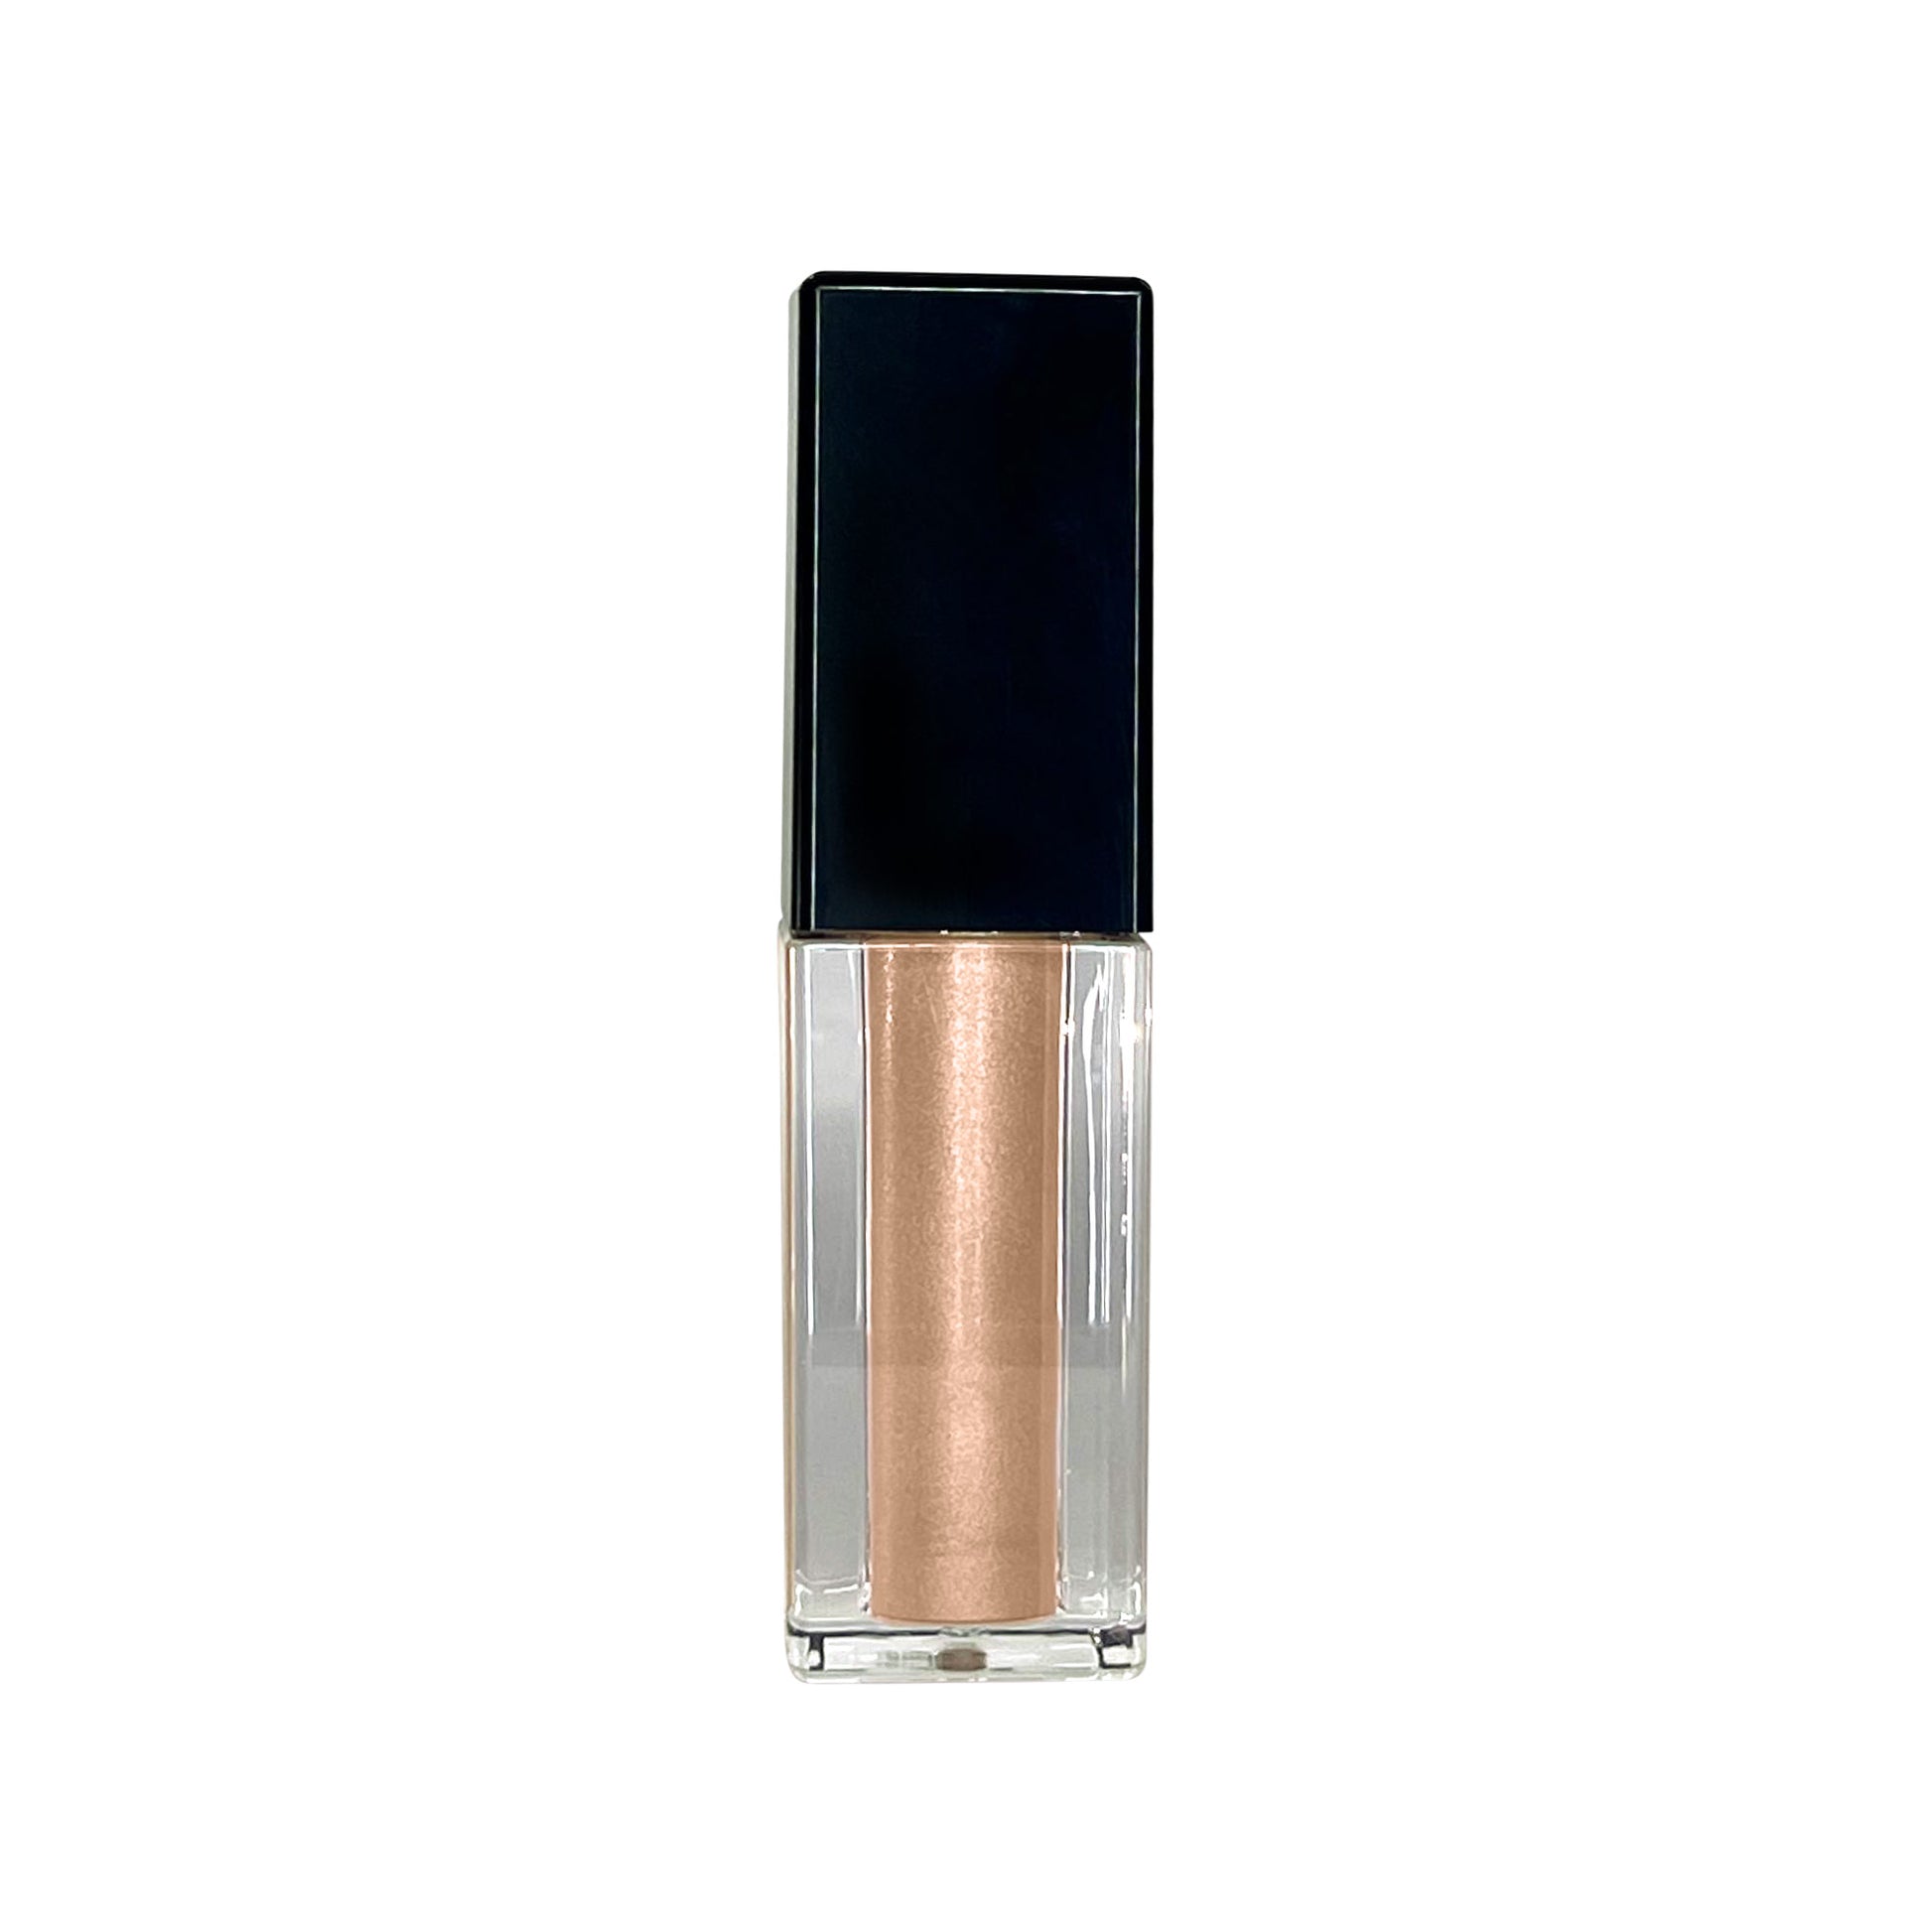 Enhance your natural beauty with Halo Liquid Highlighter from Cruisin Organics. This lightweight, concentrated formula creates a breathtaking halo effect on your cheeks, perfect for daily use or special occasions. Apply with ease using the doe-shaped applicator, revealing a radiant glow. Choose from two stunning tones for a truly elevated look.